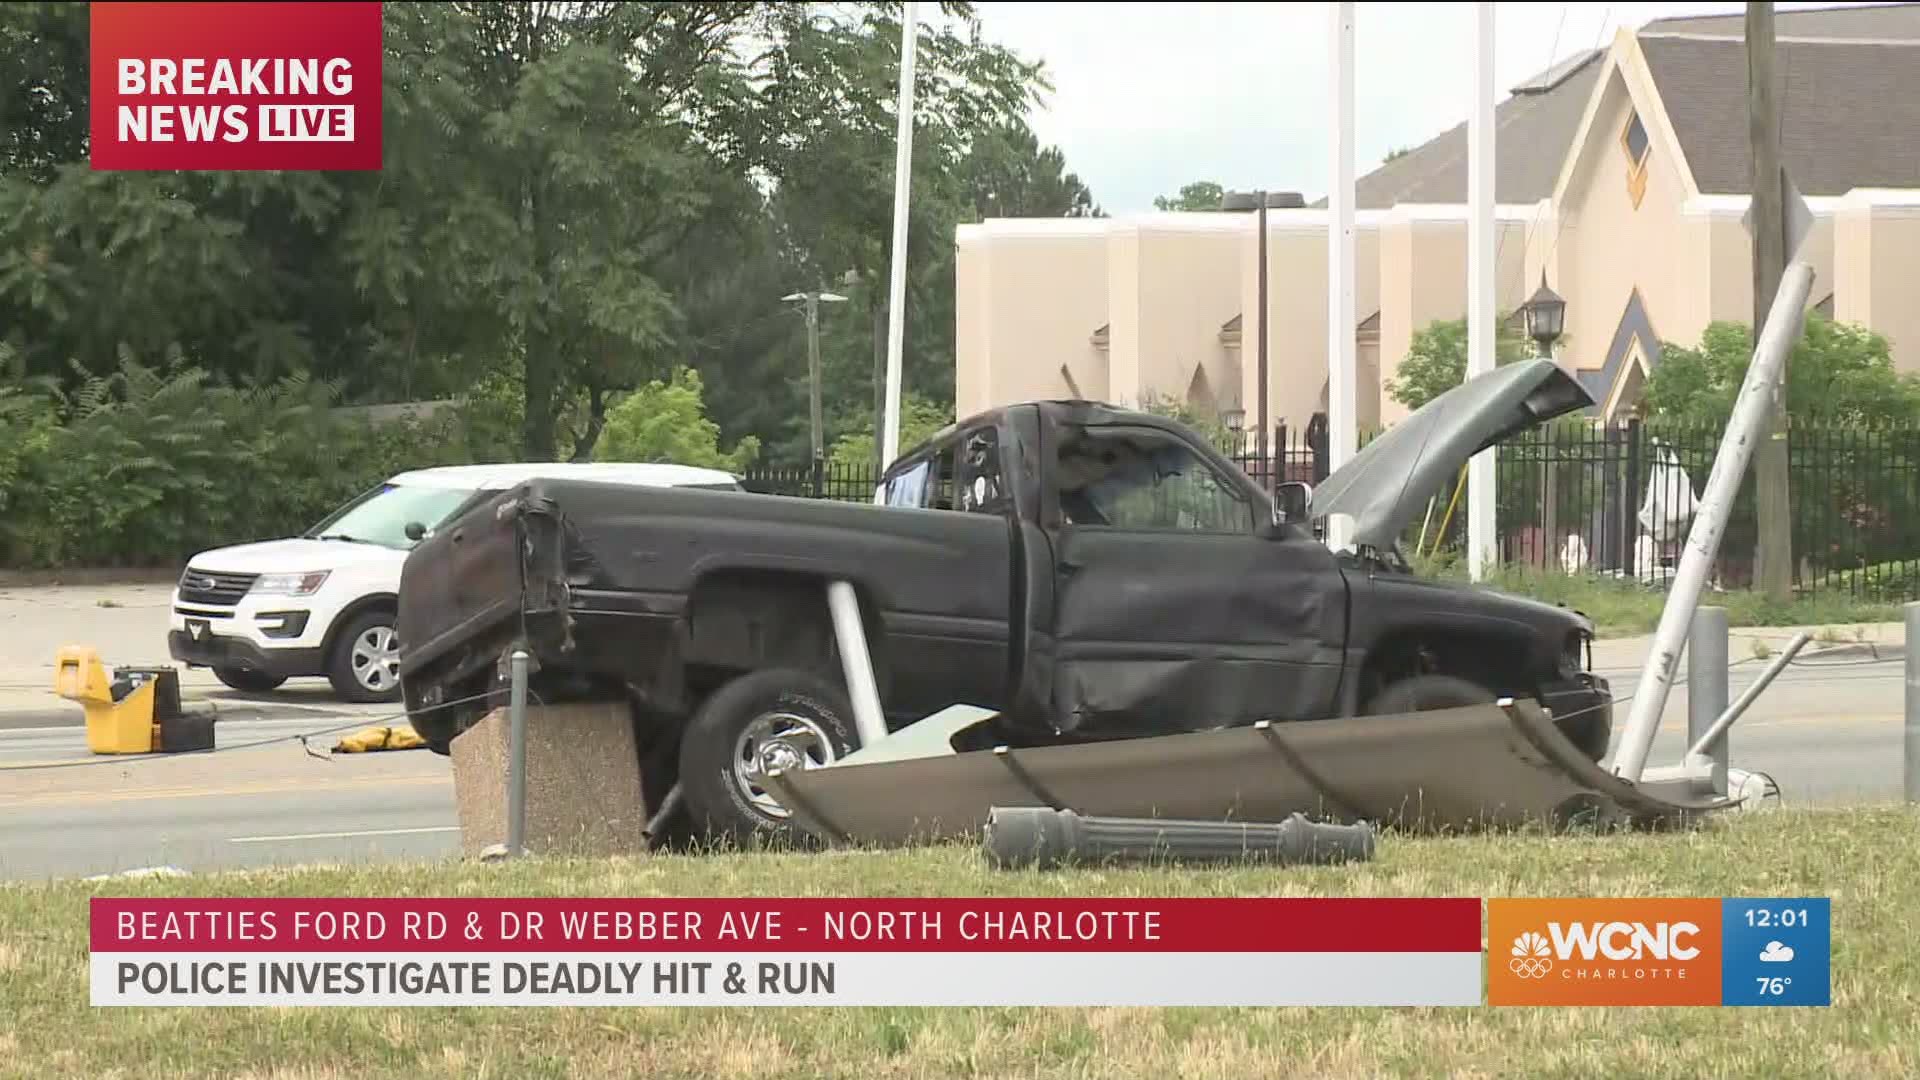 Police are investigating a hit and run that killed one person in north Charlotte Thursday morning.